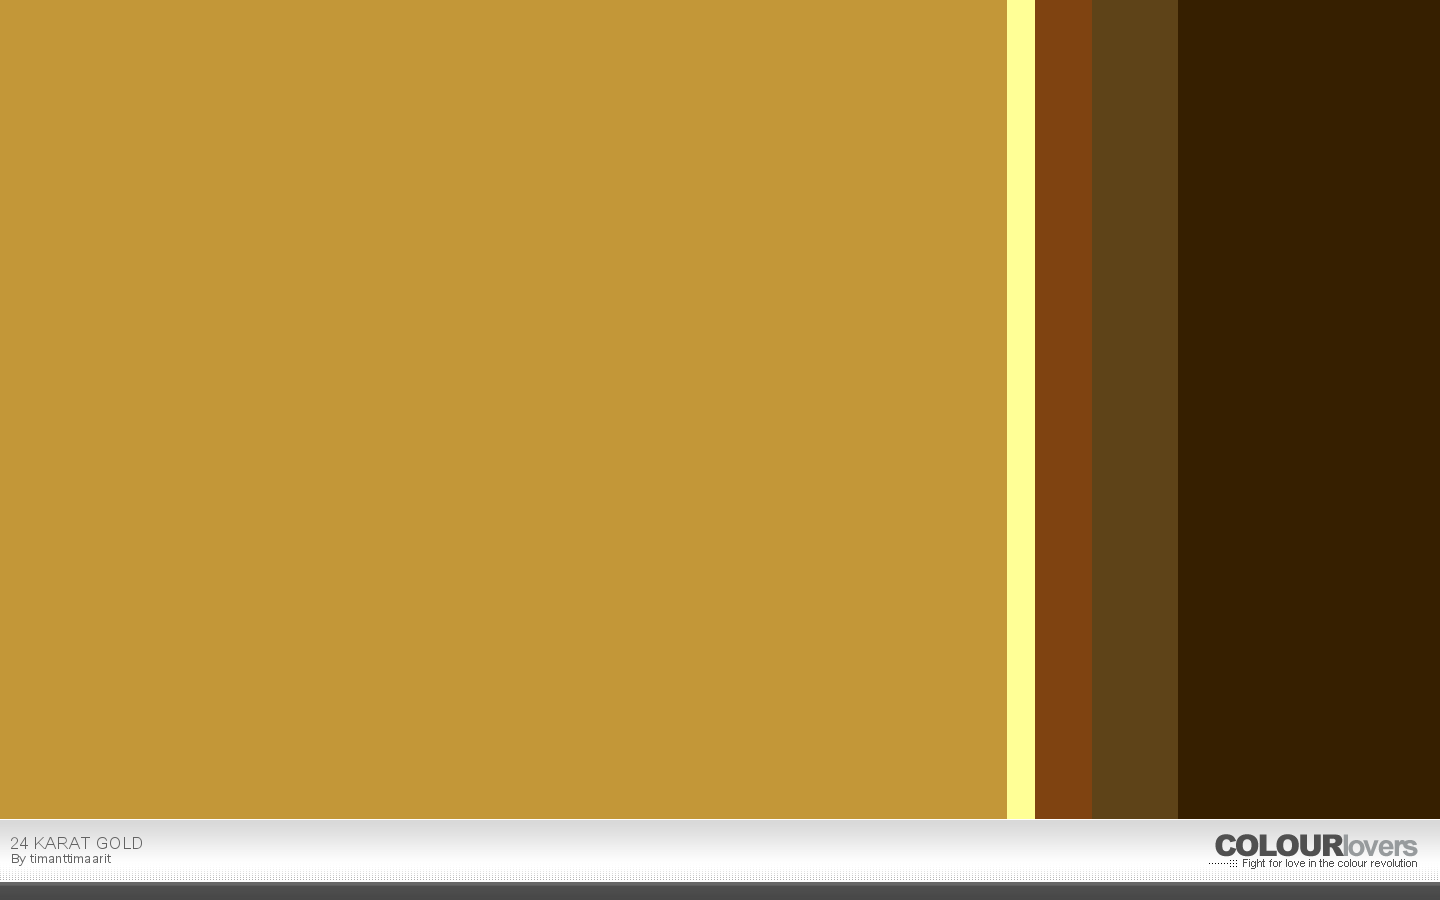 1. 24 karat gold - metallic color palettes to try